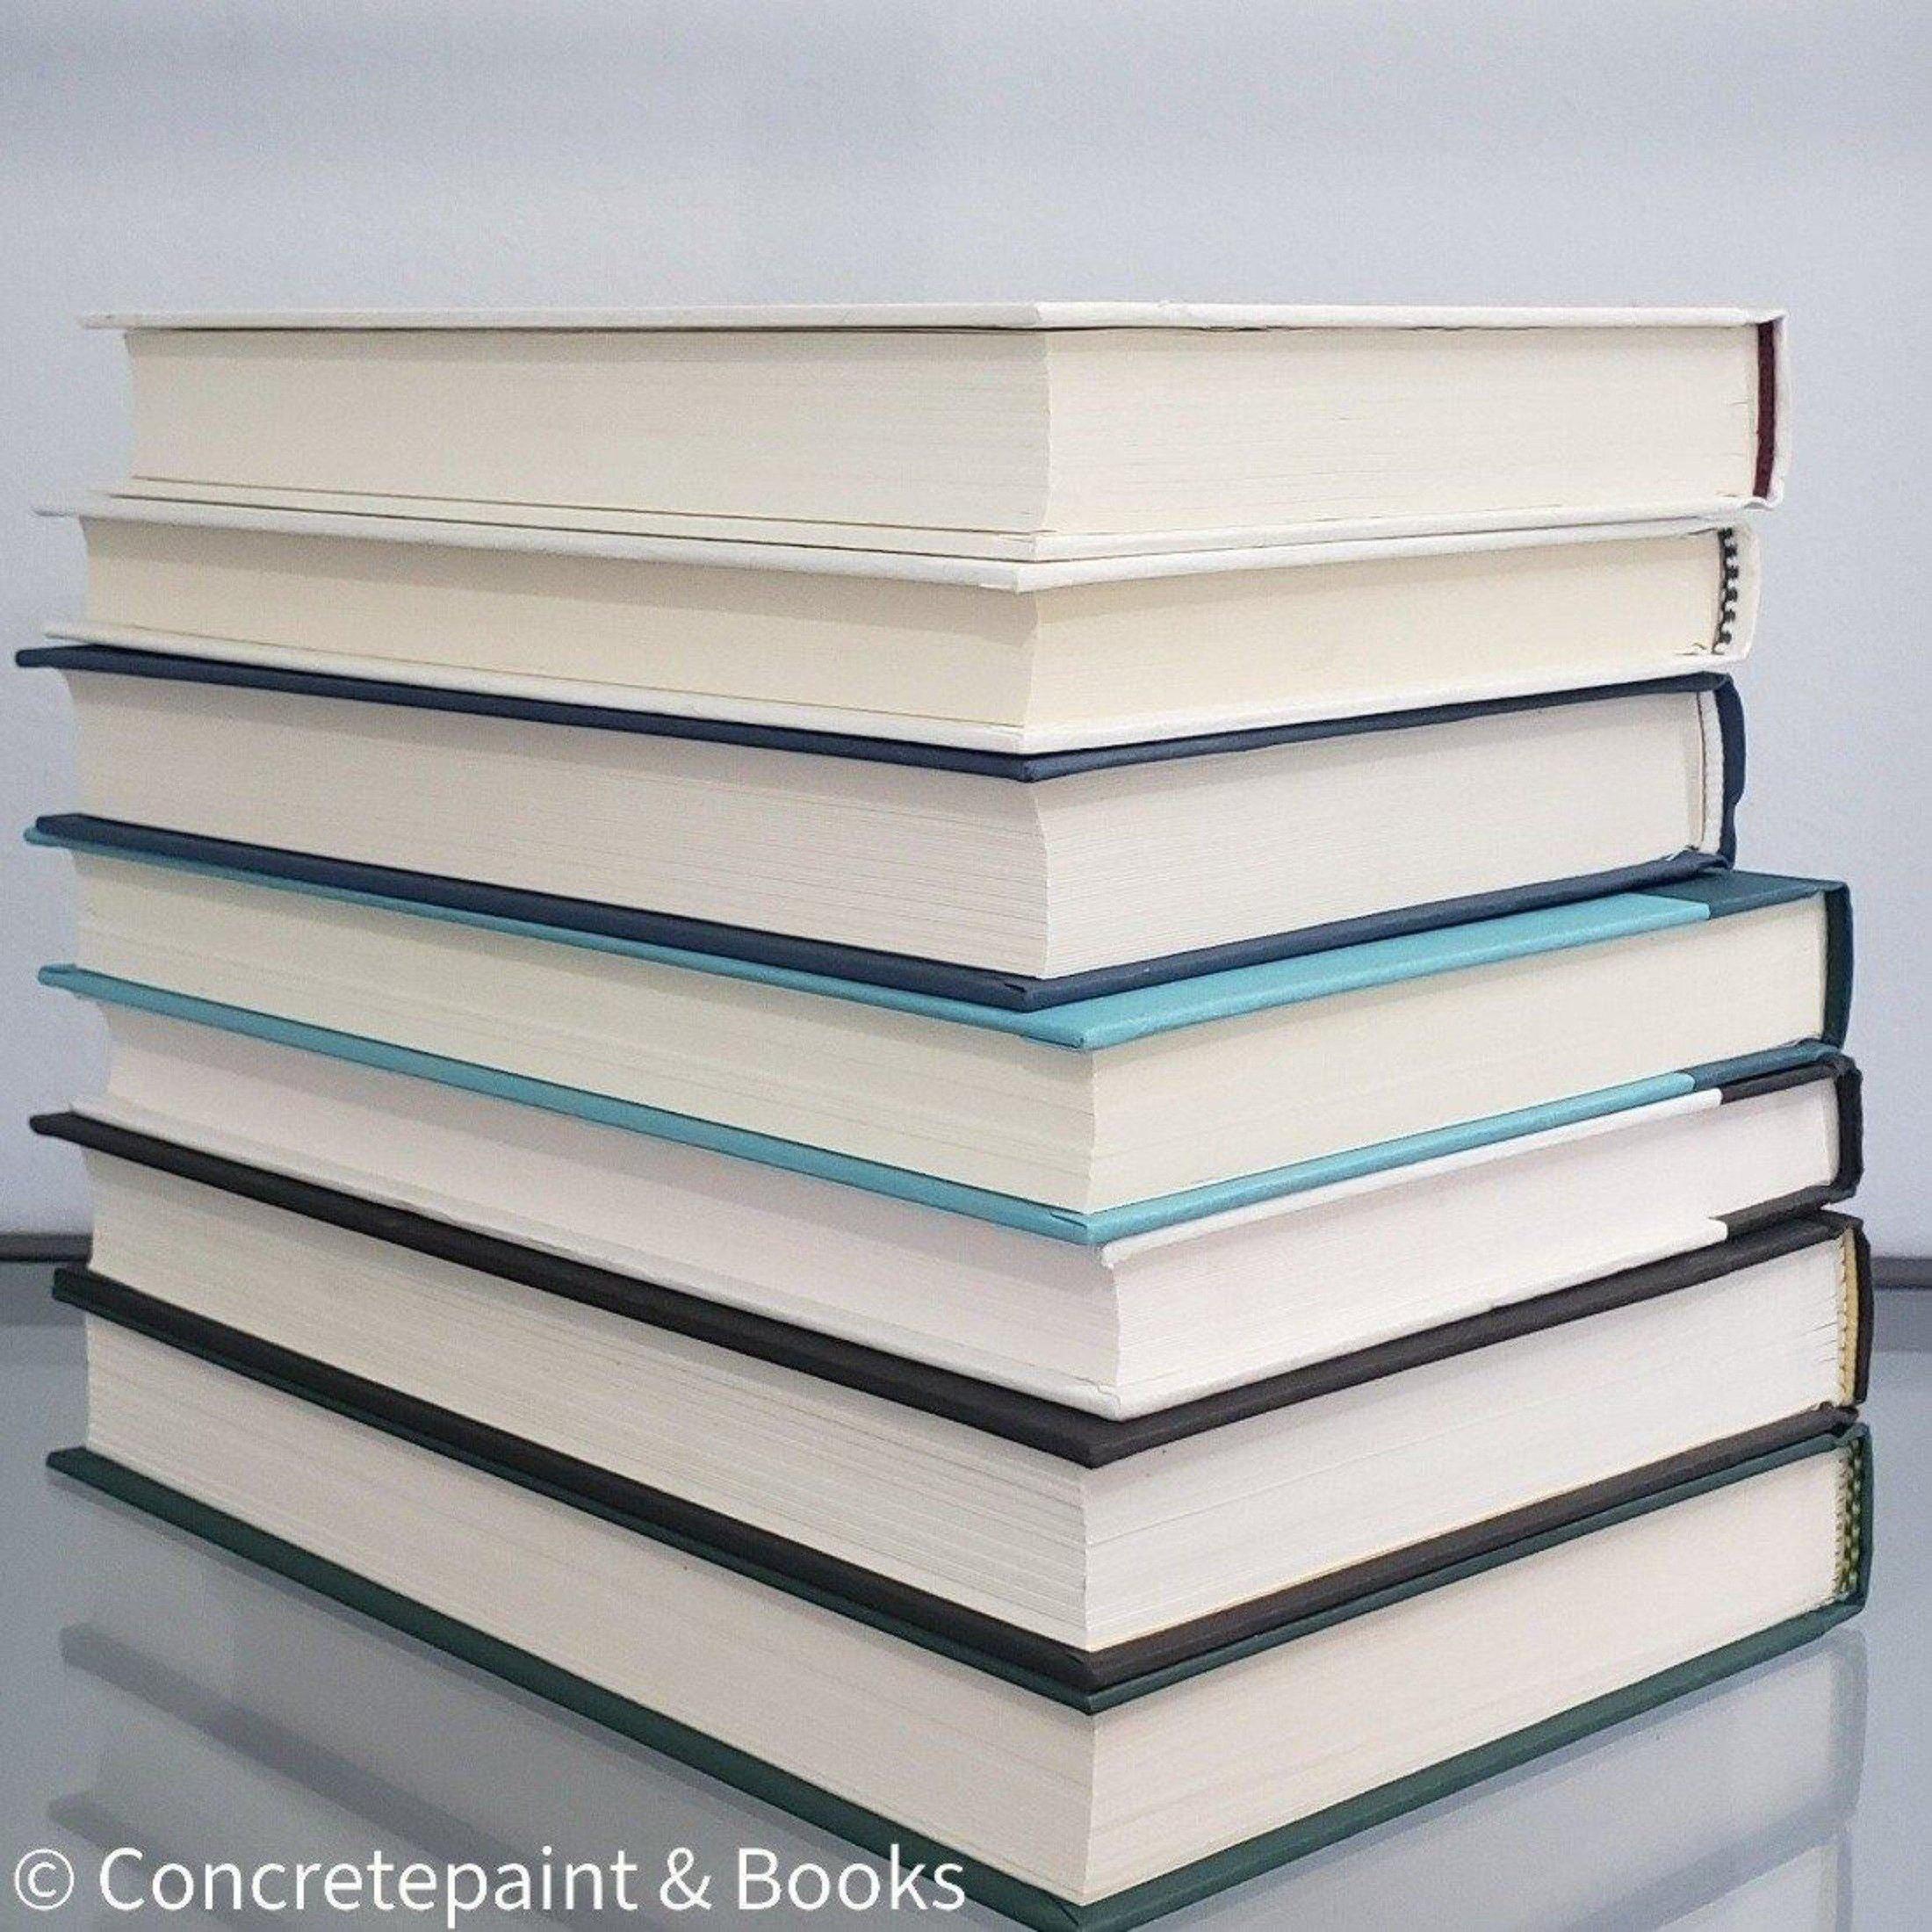 stack of 7 hardcover books on shelf display with green, blue, black and neutral binding.